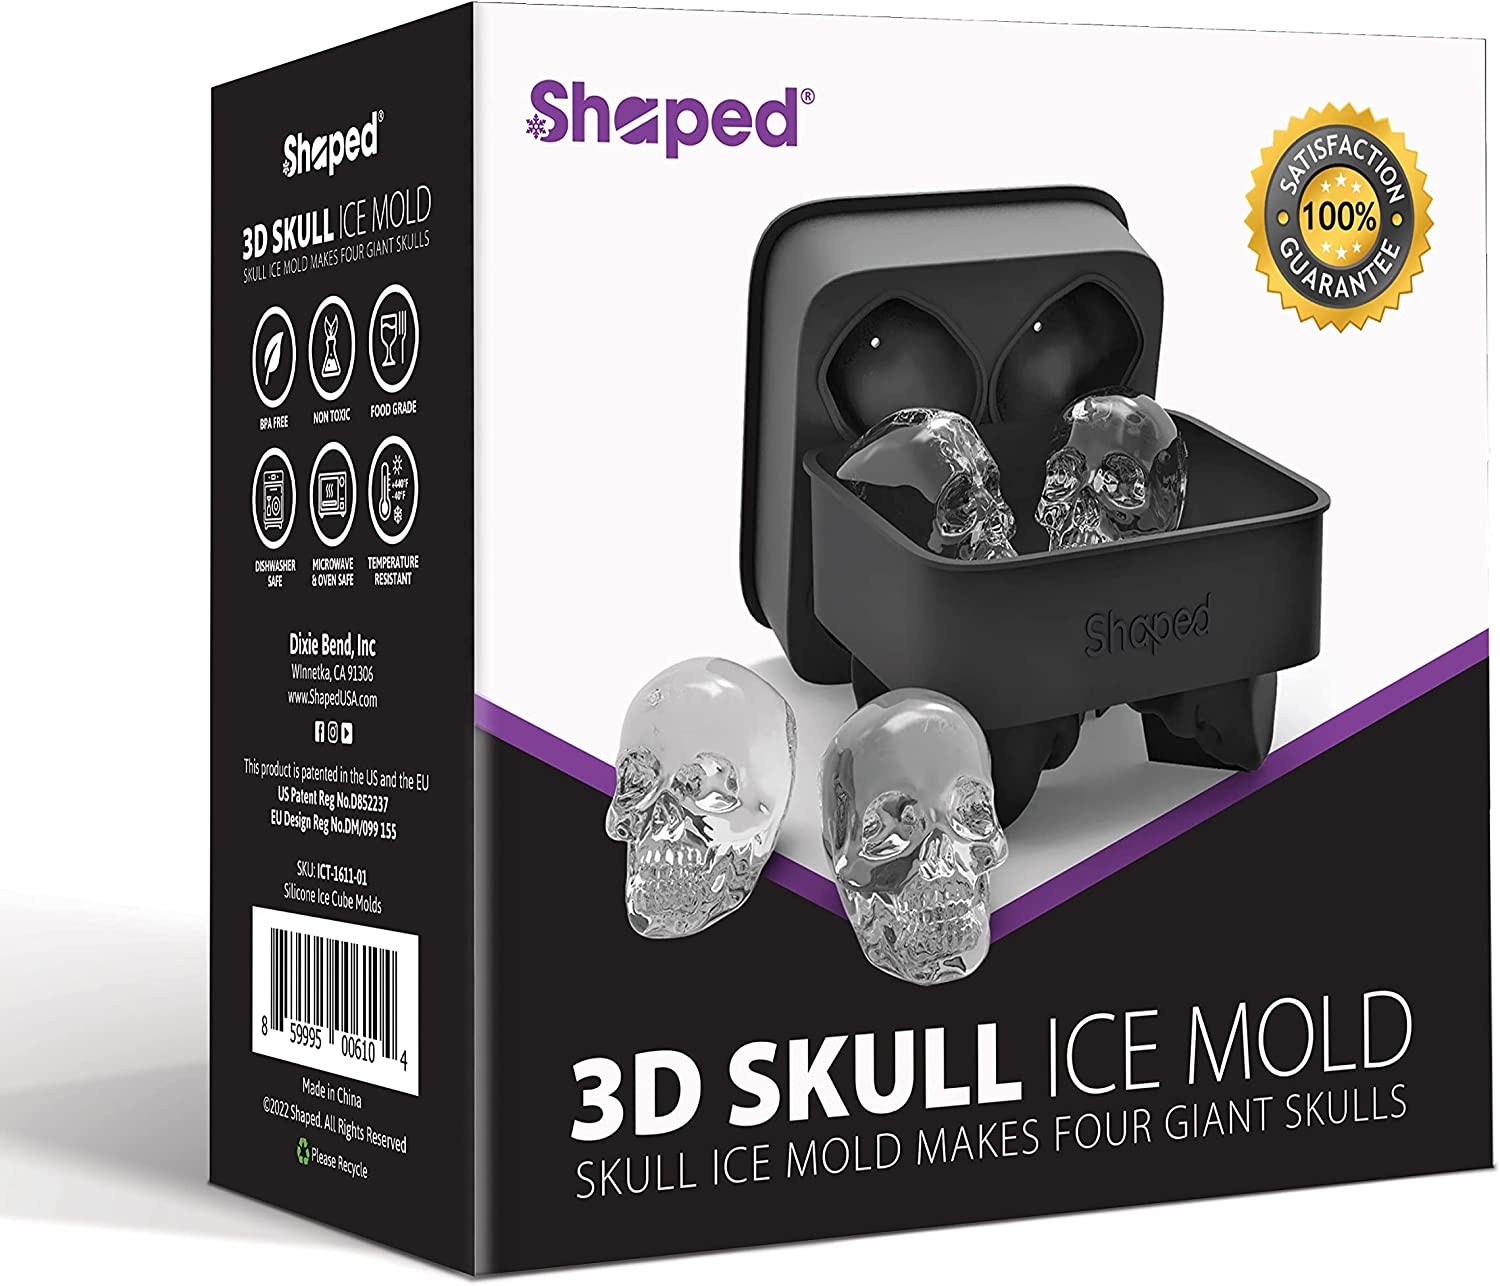 The box and packaging for the 3D skull ice cube mold maker. There is text which reads, "Skull ice mold makes four giant skulls."